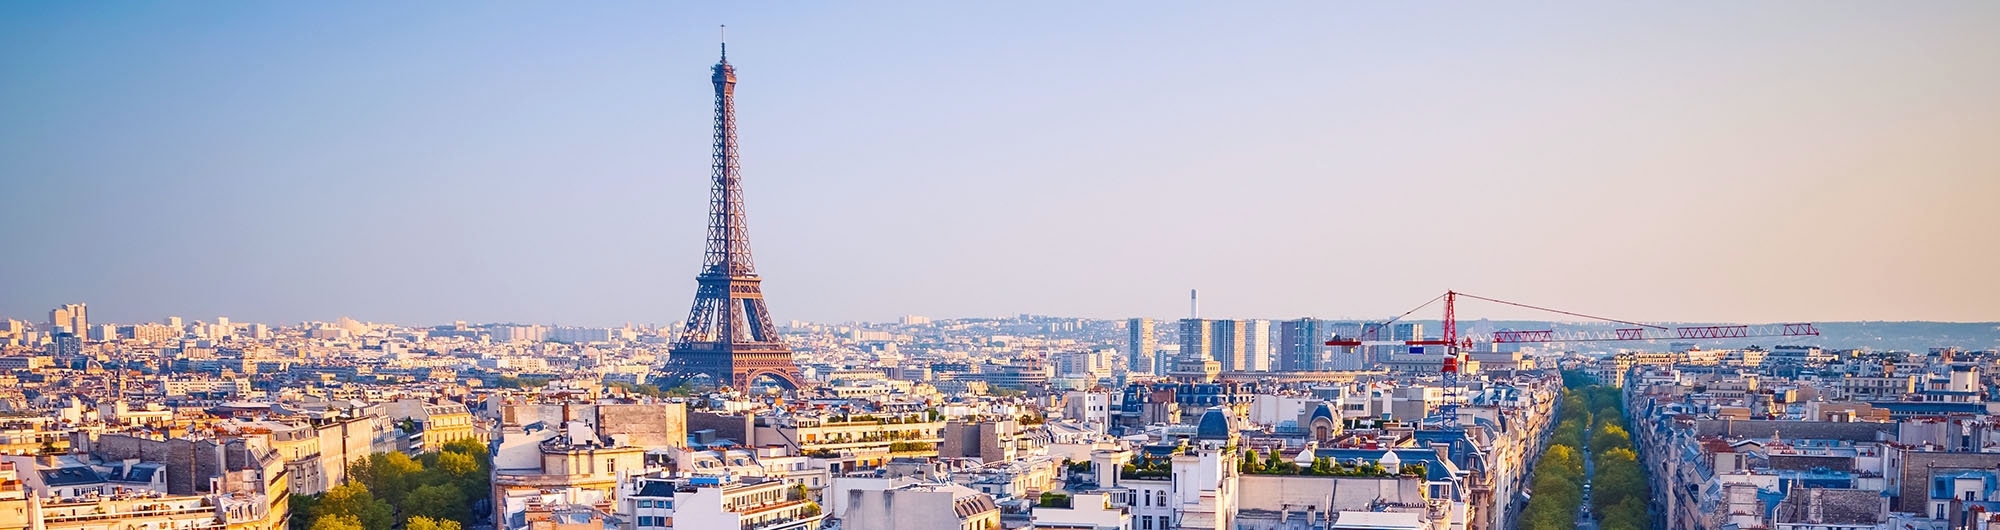 Search and compare cheap flights from Singapore to Paris